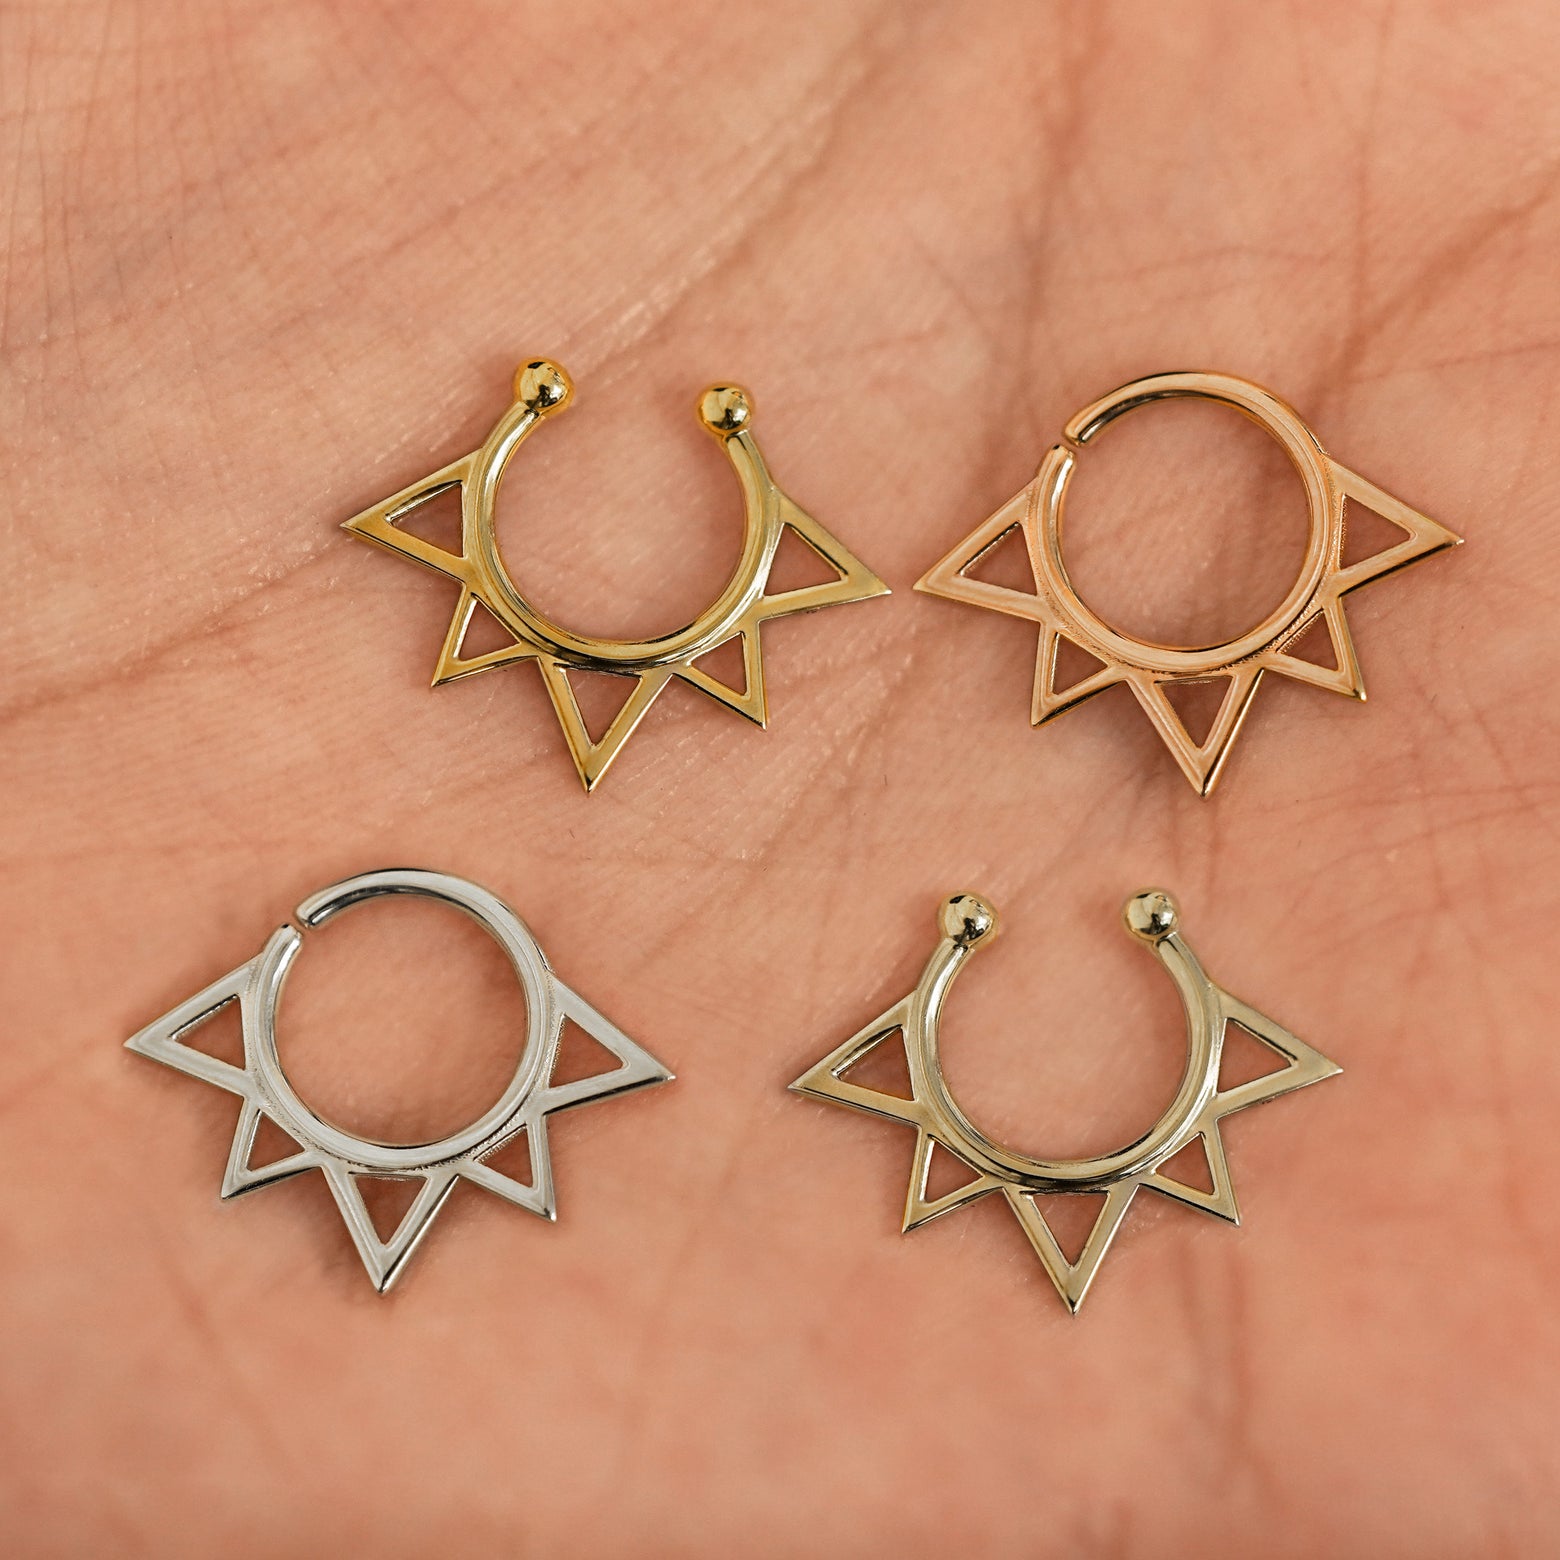 Four versions of the Sun Septum shown in options of yellow, white, rose and champagne gold in a model's palm